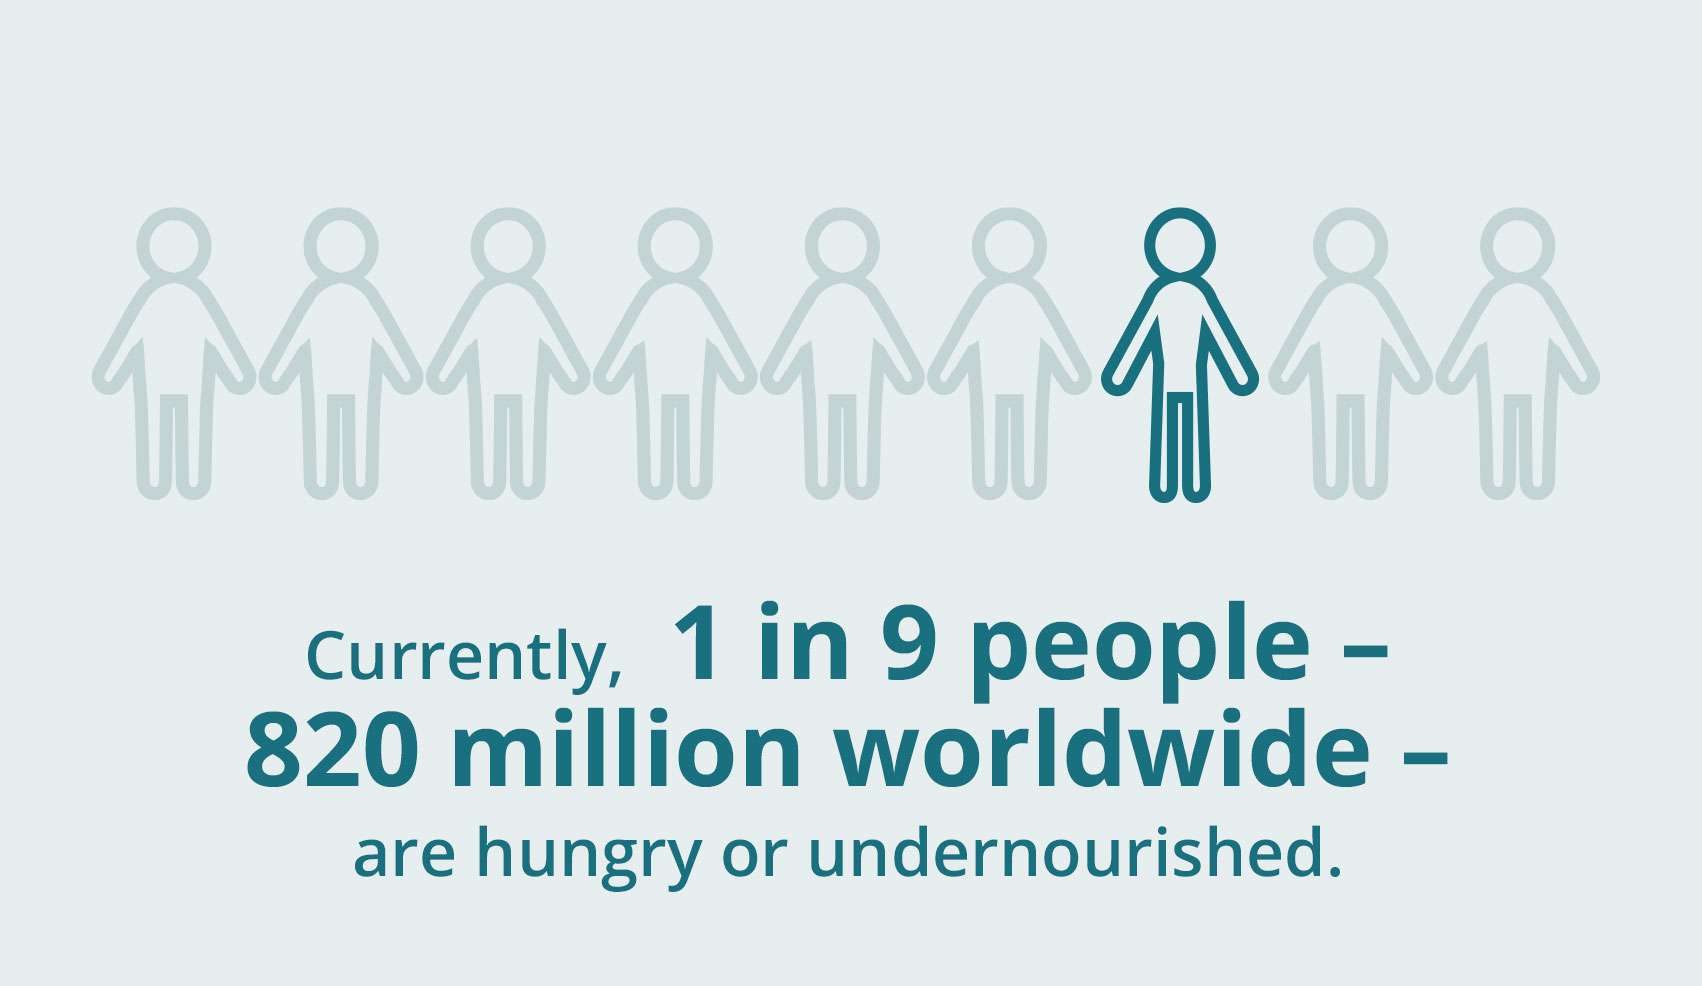 1 in 9 people are hungry or undernourished